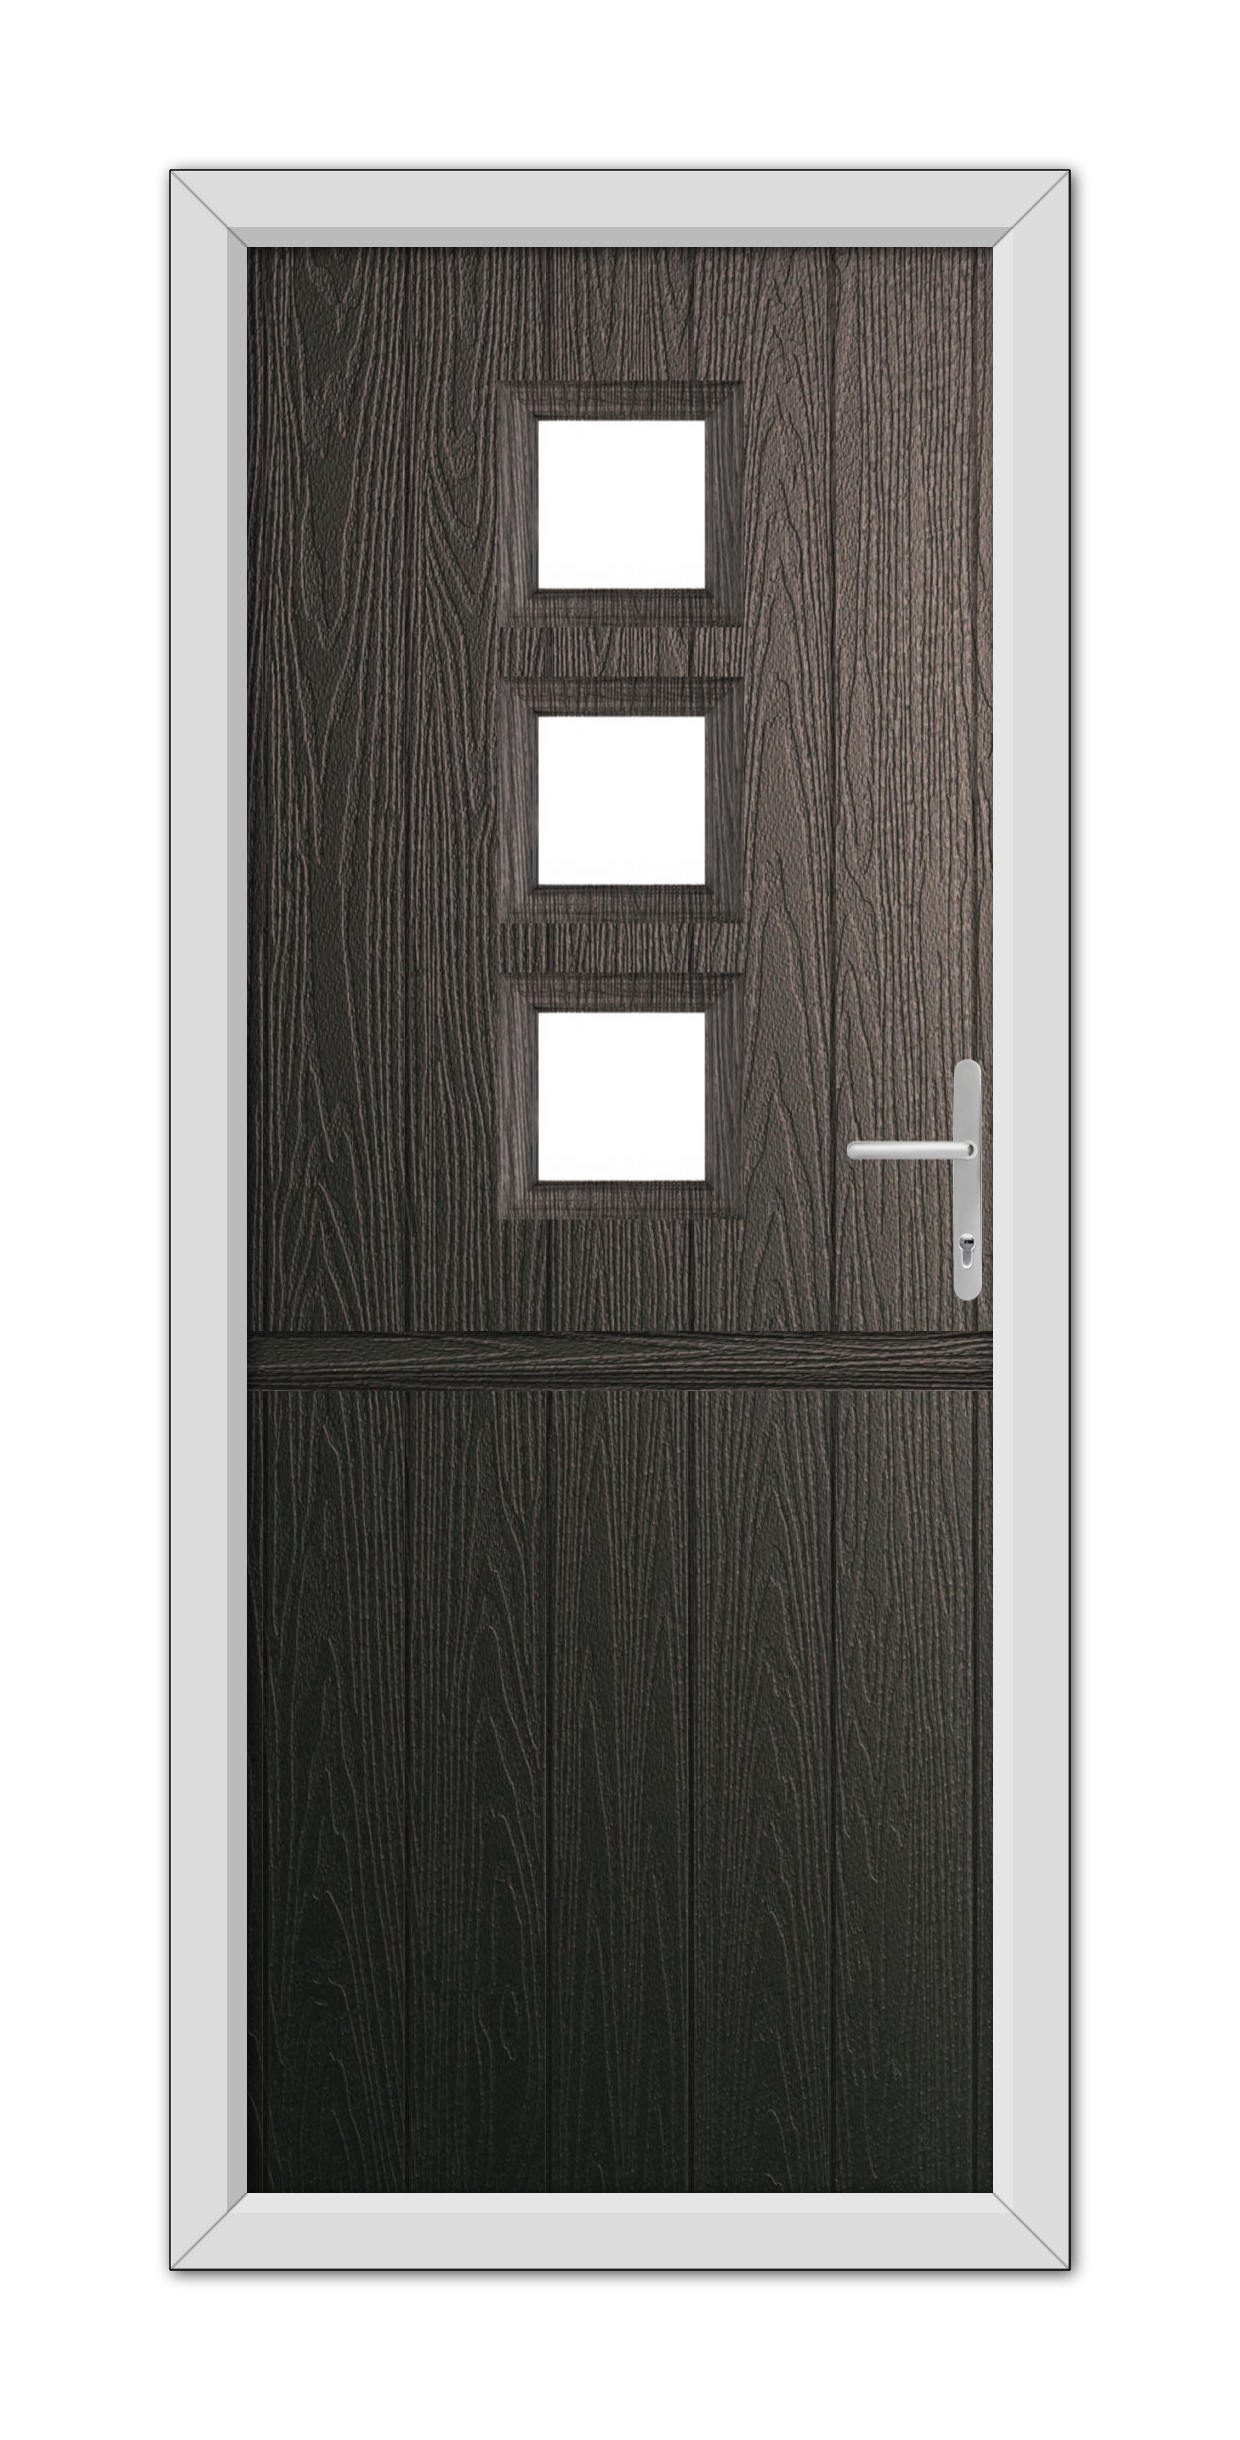 Schwarzbraun Montrose Stable Composite Door 48mm Timber Core with three glass panels and metal door handle, set within a light gray frame, isolated on a white background.